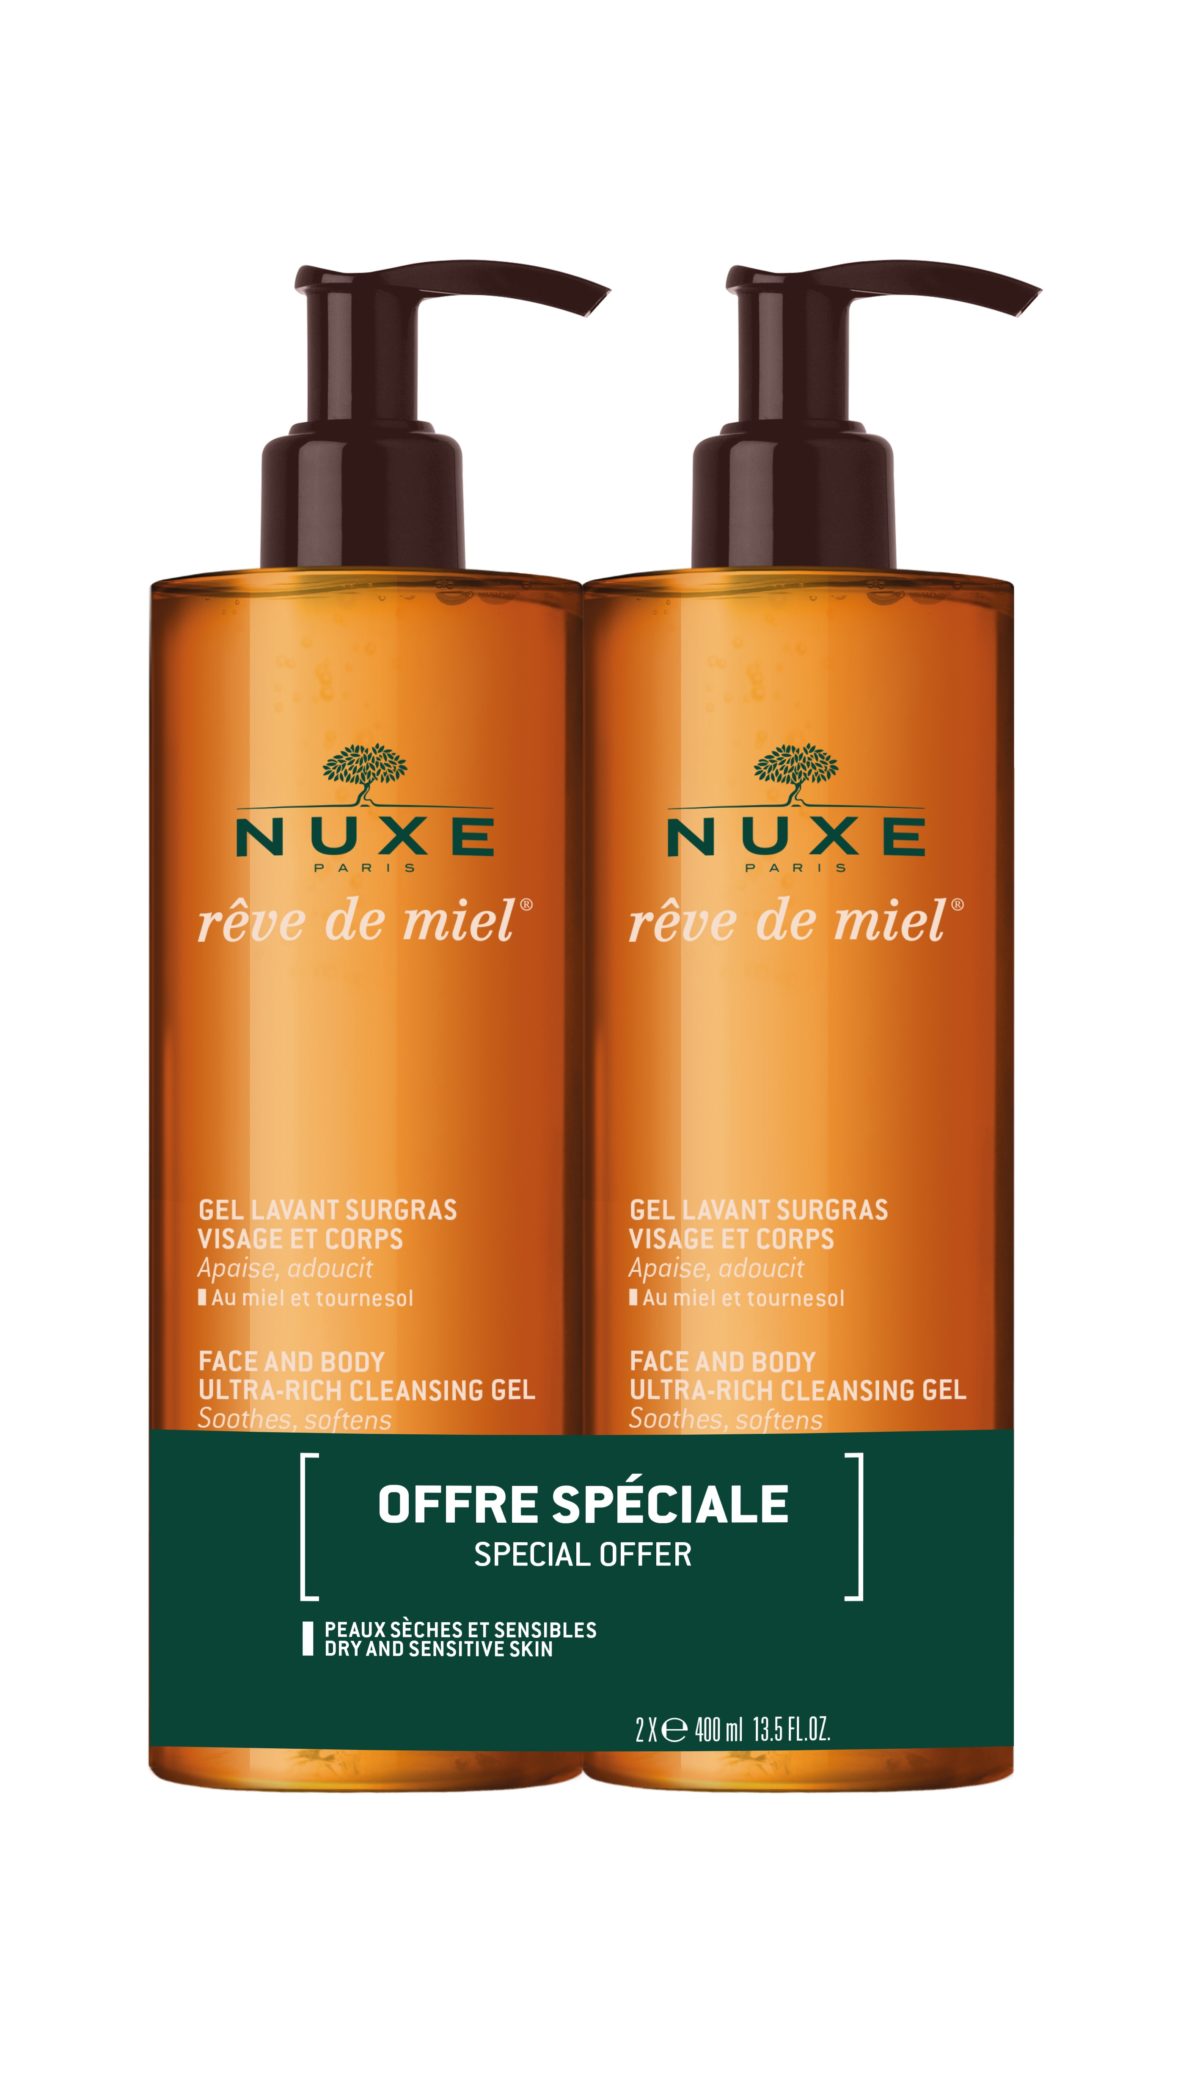 Nuxe Reve de Miel Face and body ultra rich cleansing gel duo 400 ml + 400 ml